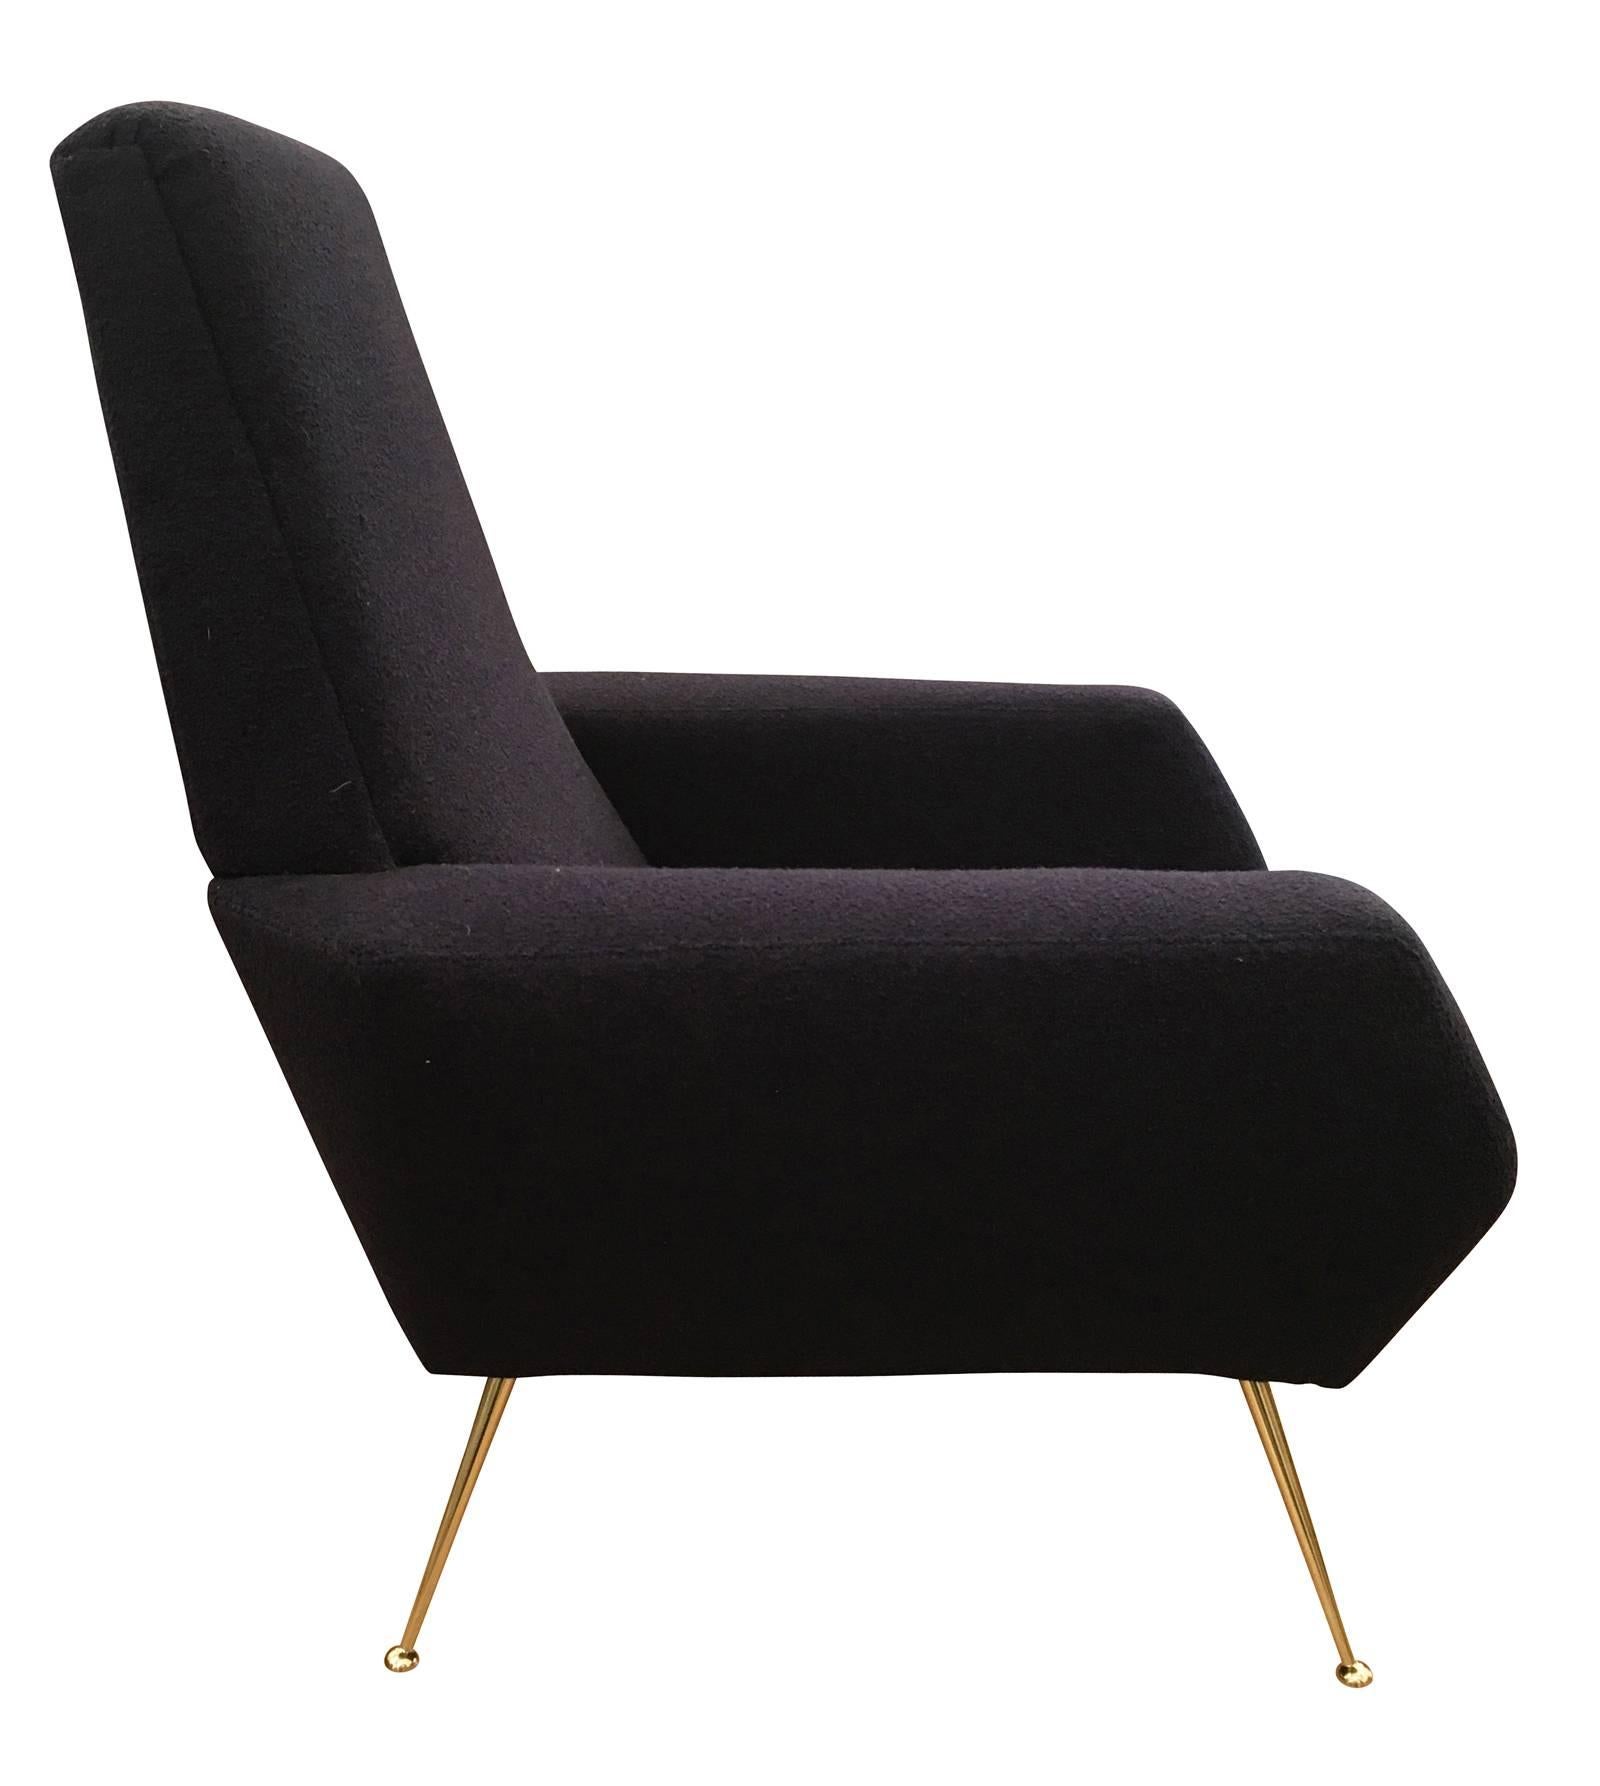 Lounge chairs characterized by straight and diagonal lines. High seat and beautiful brass detailed legs.Very comfortable.This is a great example of Mid-century Italian design.One has been upholstered with the fabric shown for display purposes and